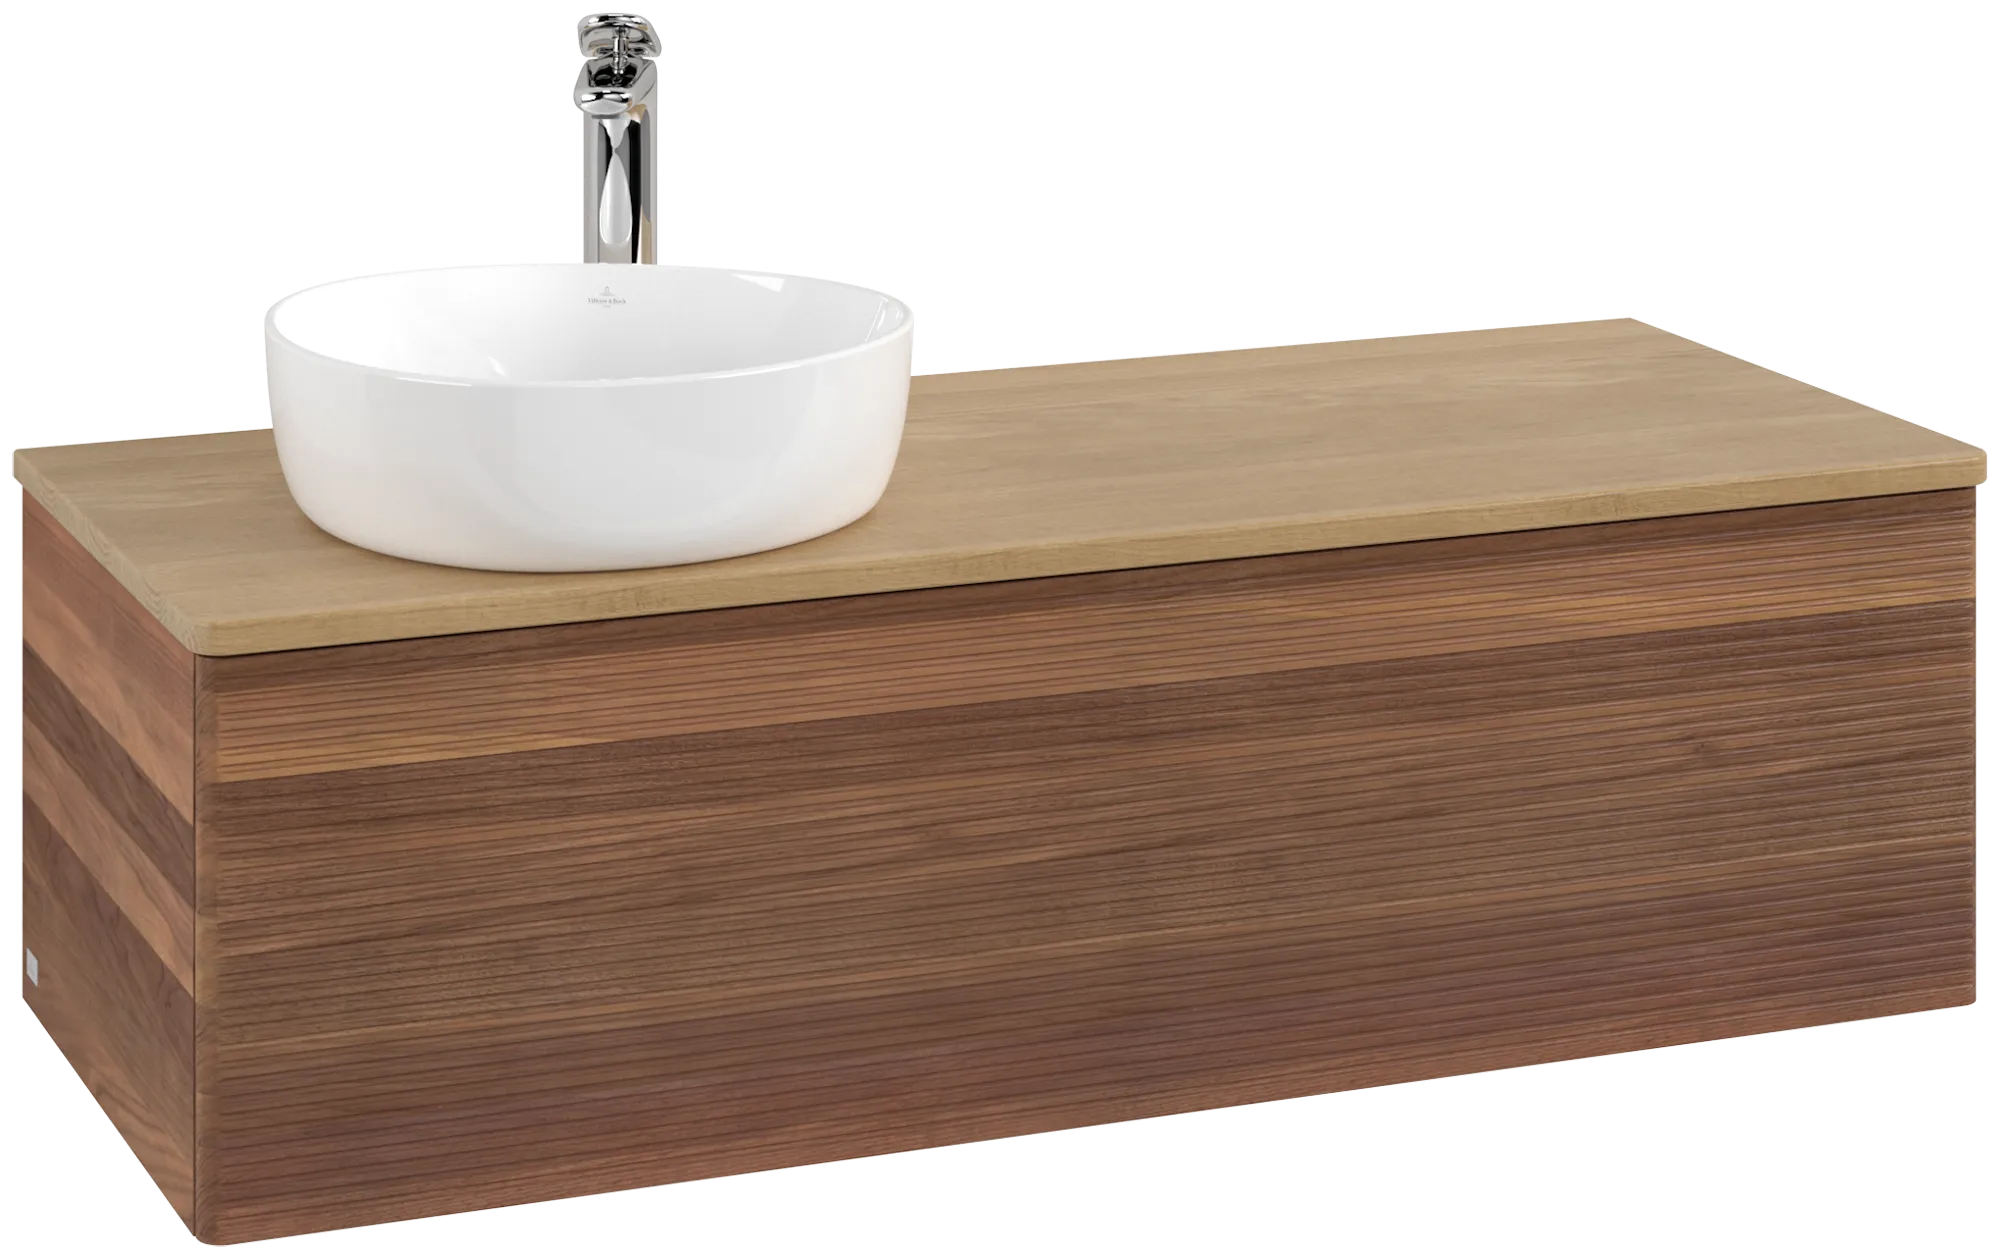 VILLEROY BOCH Antao Vanity unit, with lighting, 1 pull-out compartment, 1200 x 360 x 500 mm, Front with grain texture, Warm Walnut / Honey Oak #L33151HM resmi